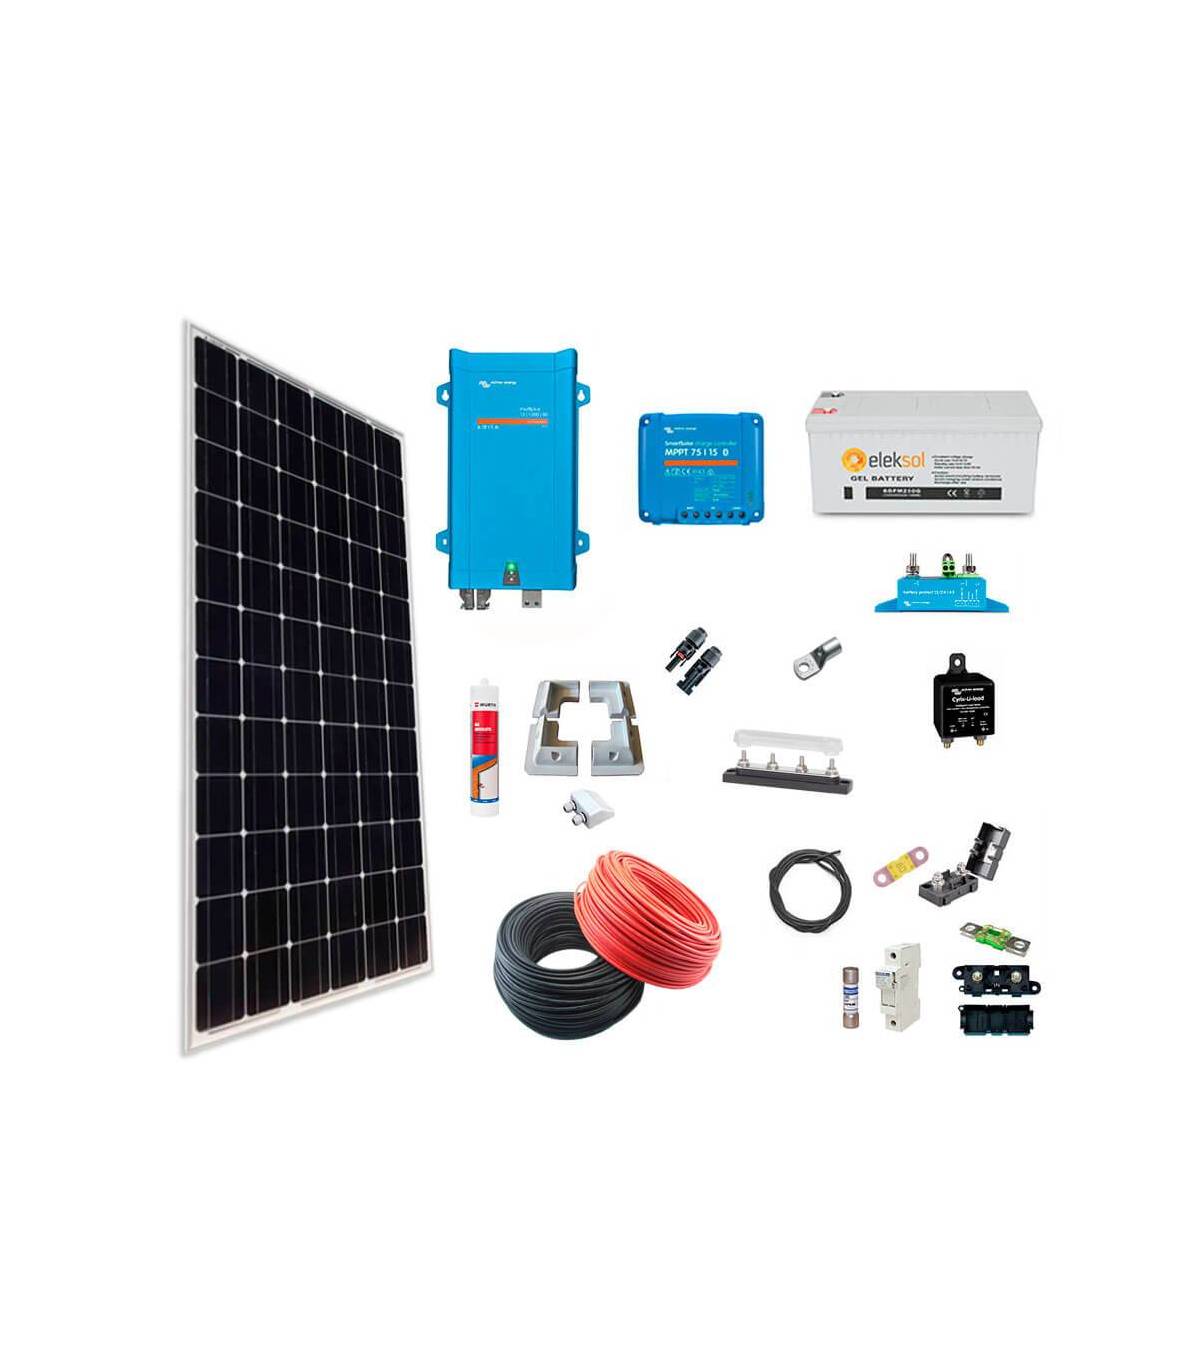 215W VICTRON ENERGY SOLAR PANEL KIT WITH 15A BLUETOOTH SMART MPPT